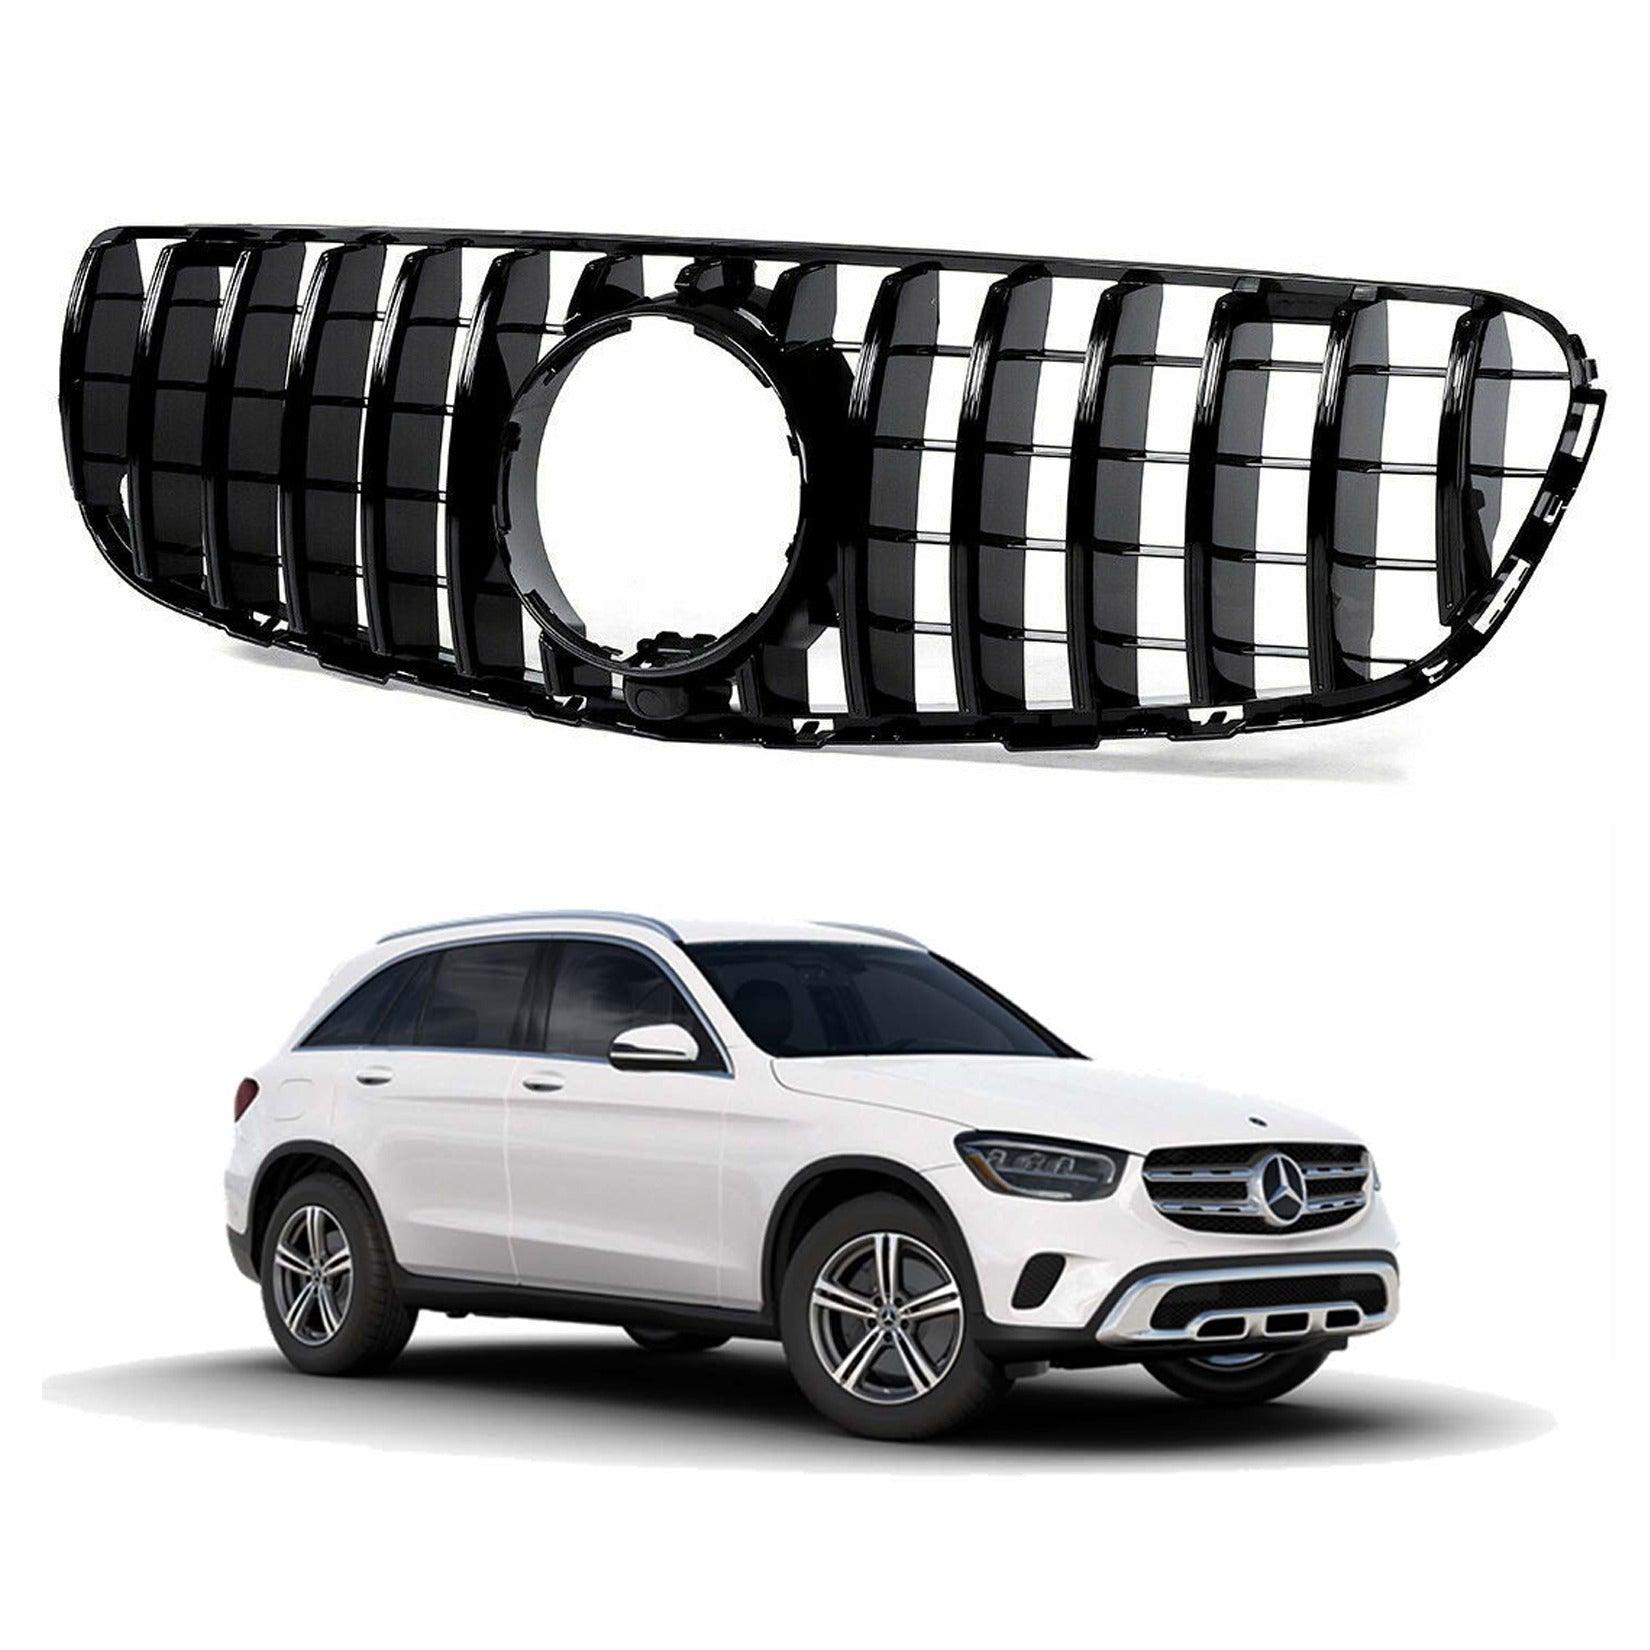 MERCEDES GLC X253 2015 - 2019 PANAMERICANA GT STYLE UPGRADE FRONT GRILL - GLOSS BLACK - Storm Xccessories2